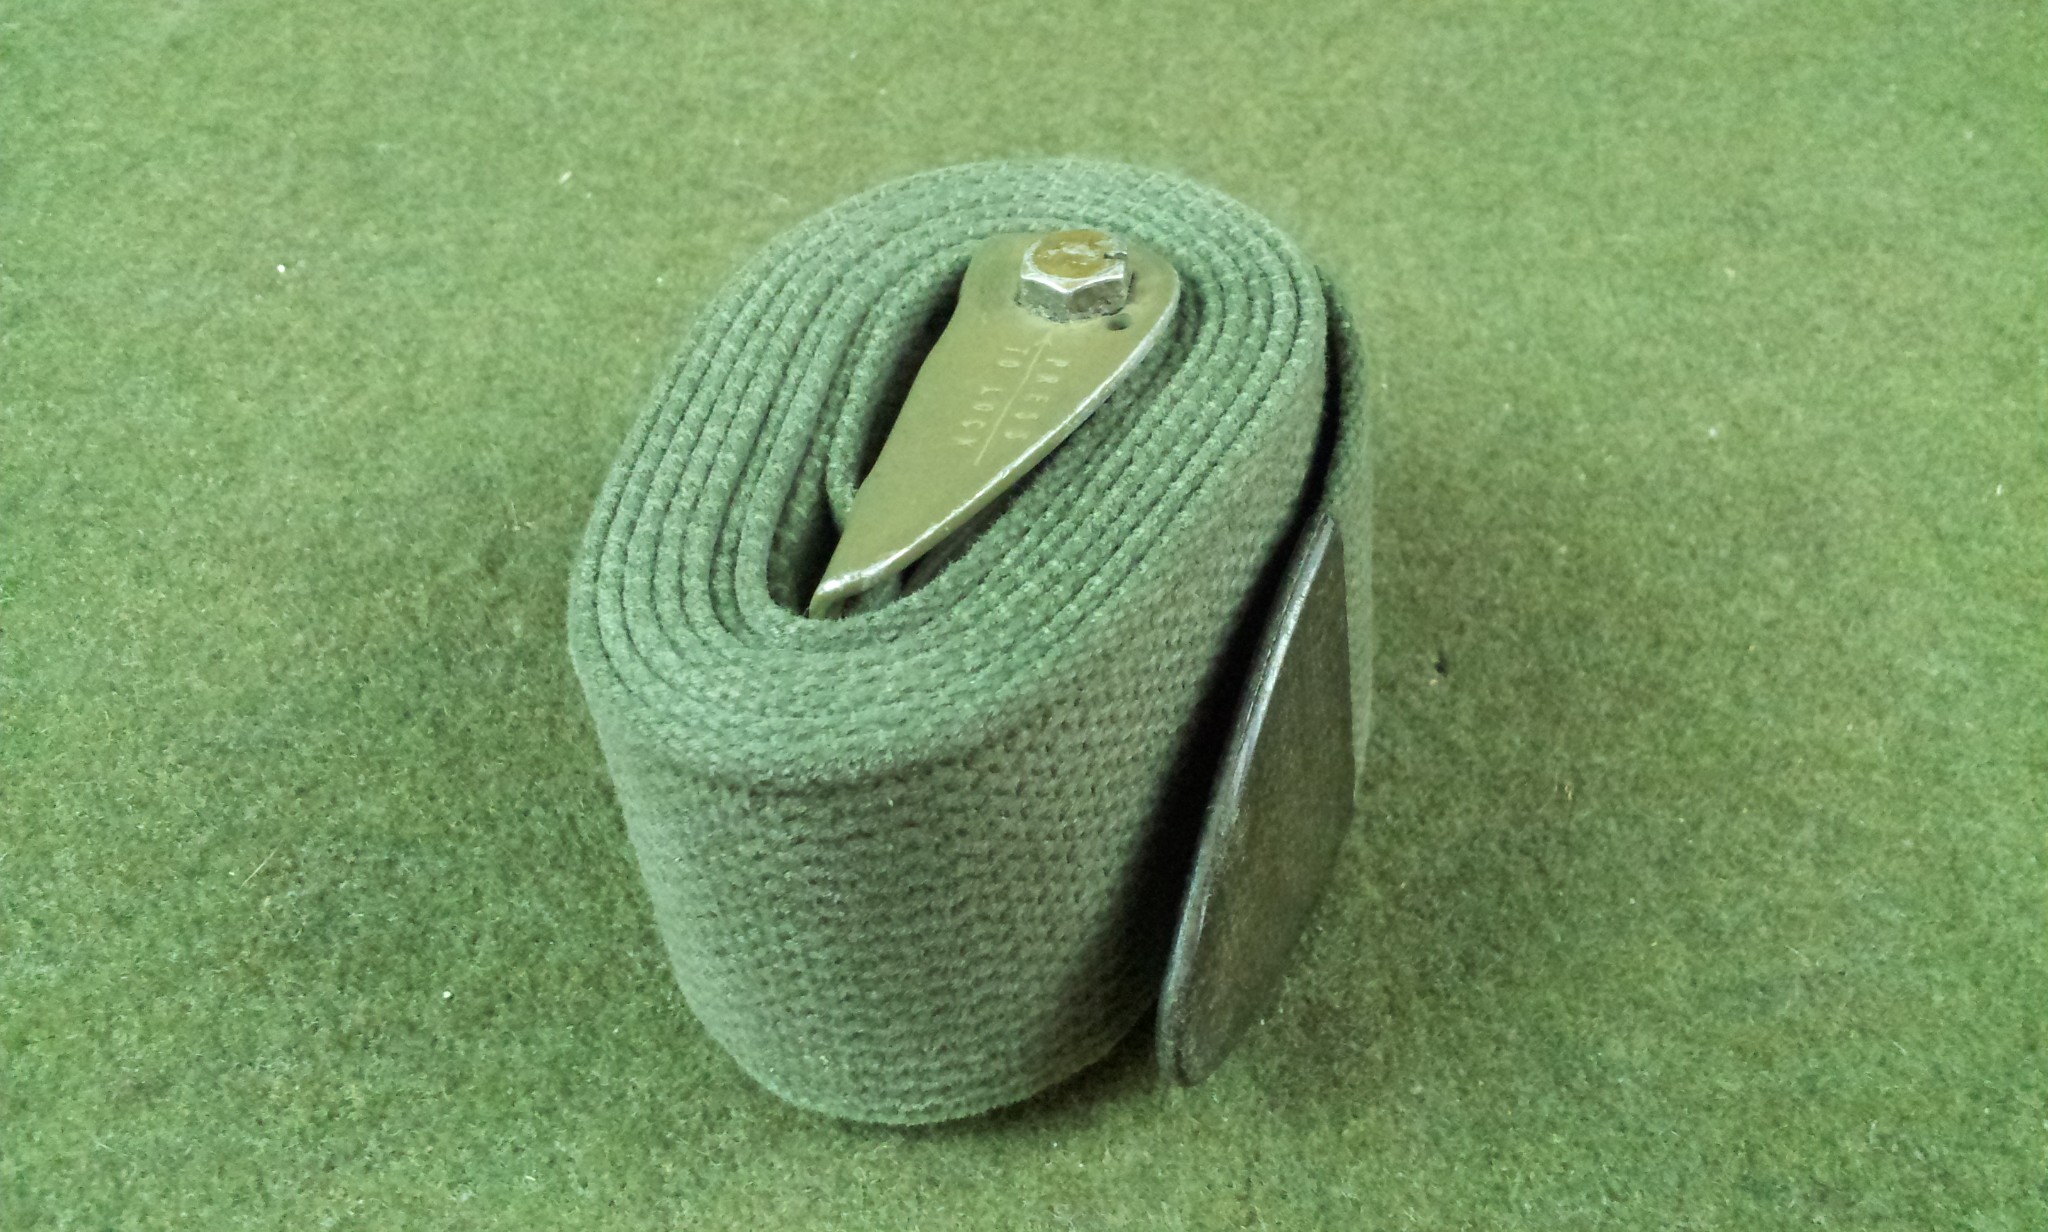 New Old Stock Military 2" x 72" OD Green Cotton Webbing Strap Litter Restraint With Buckle